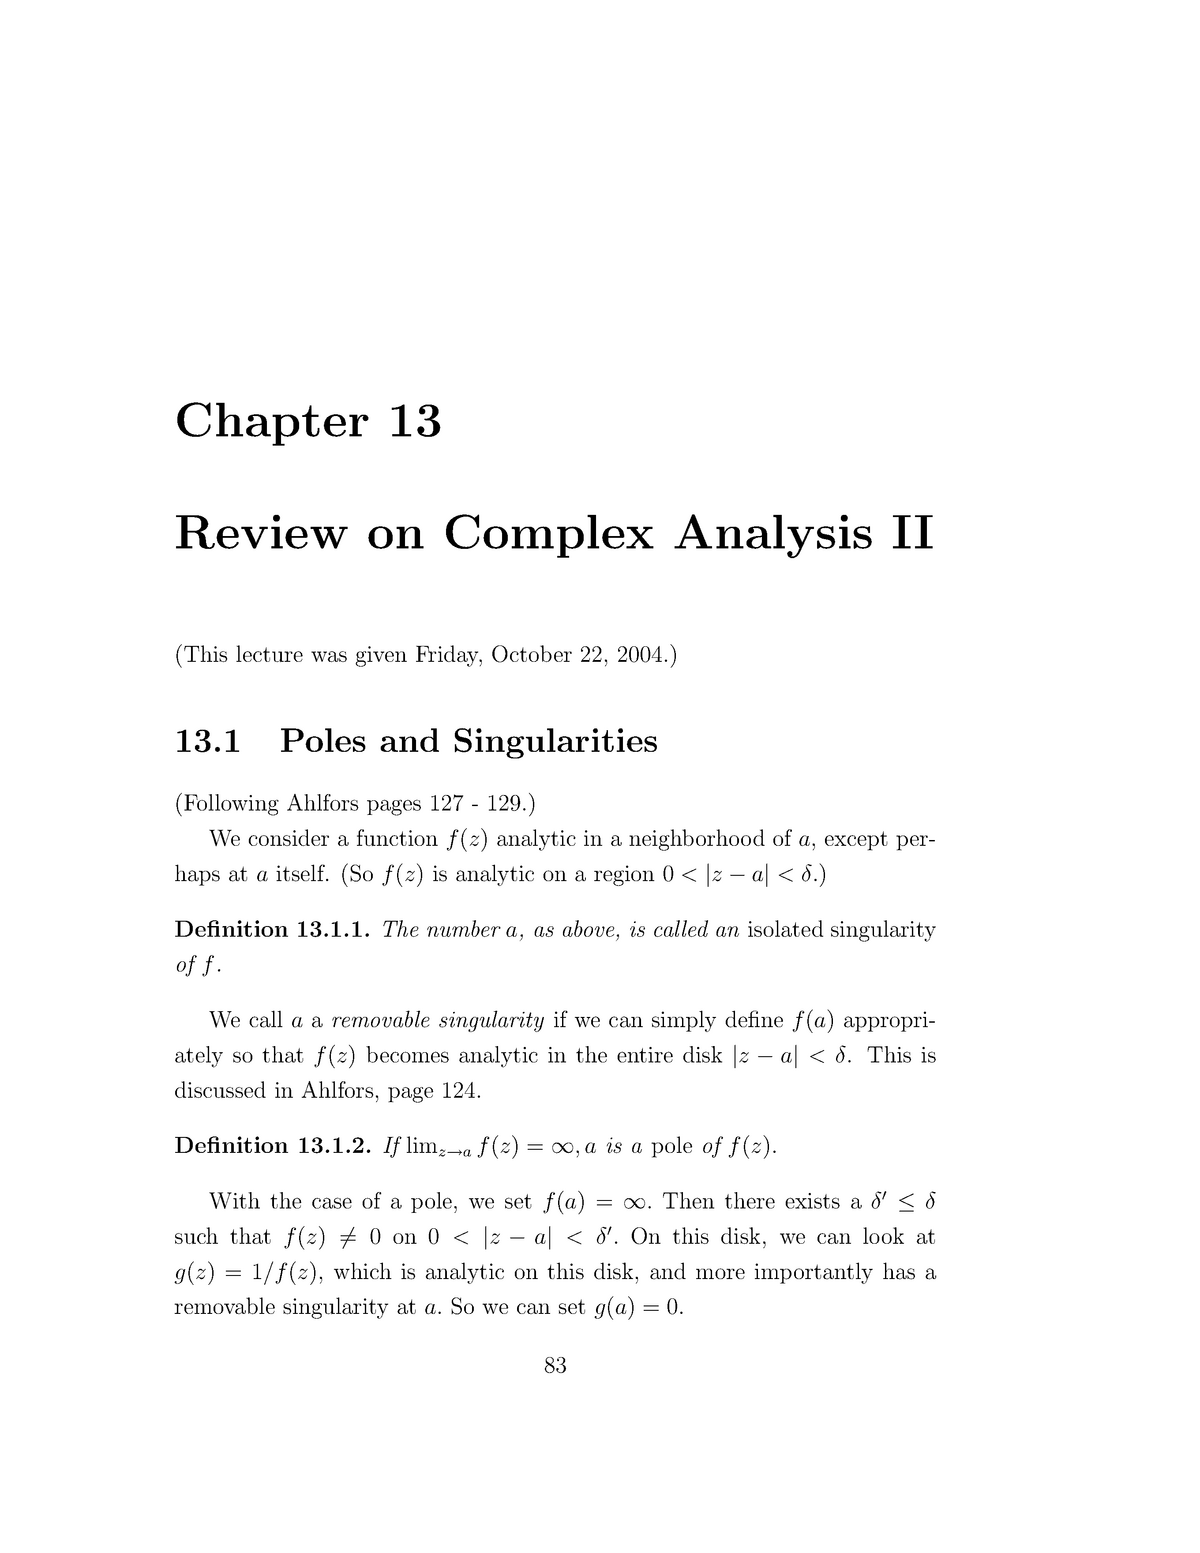 research on complex analysis